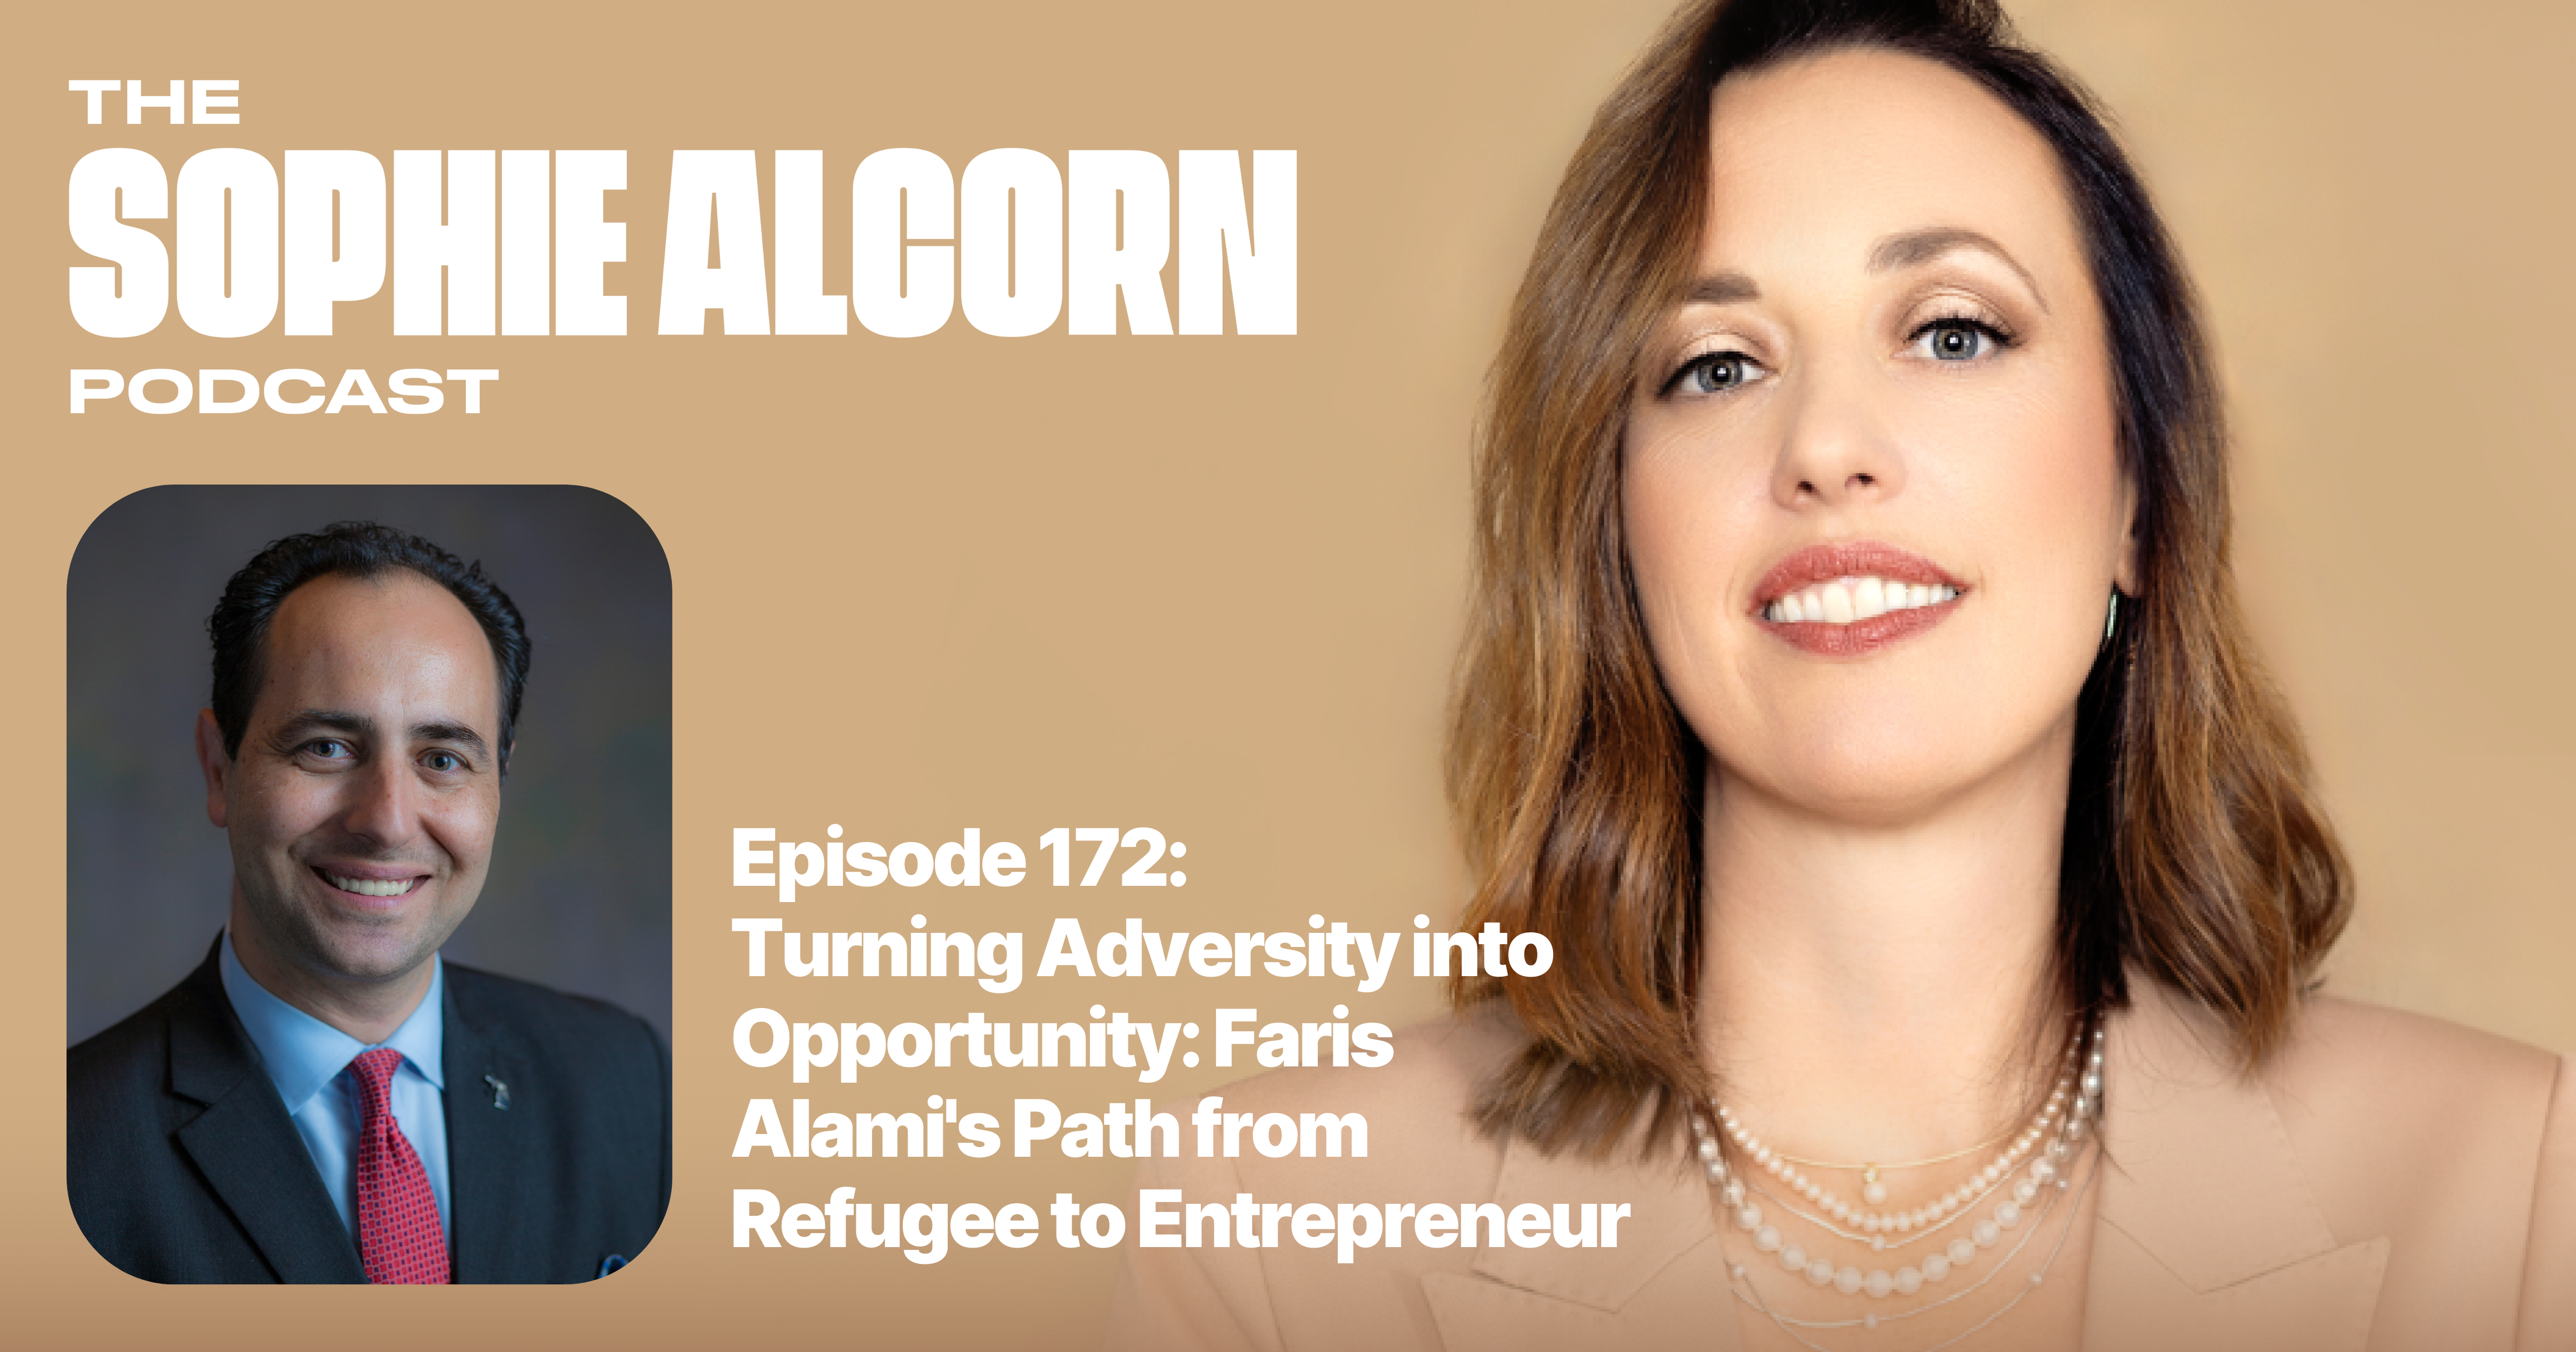 Faris Alami speaks with Sophie Alcorn on the Sophie Alcorn Podcast.